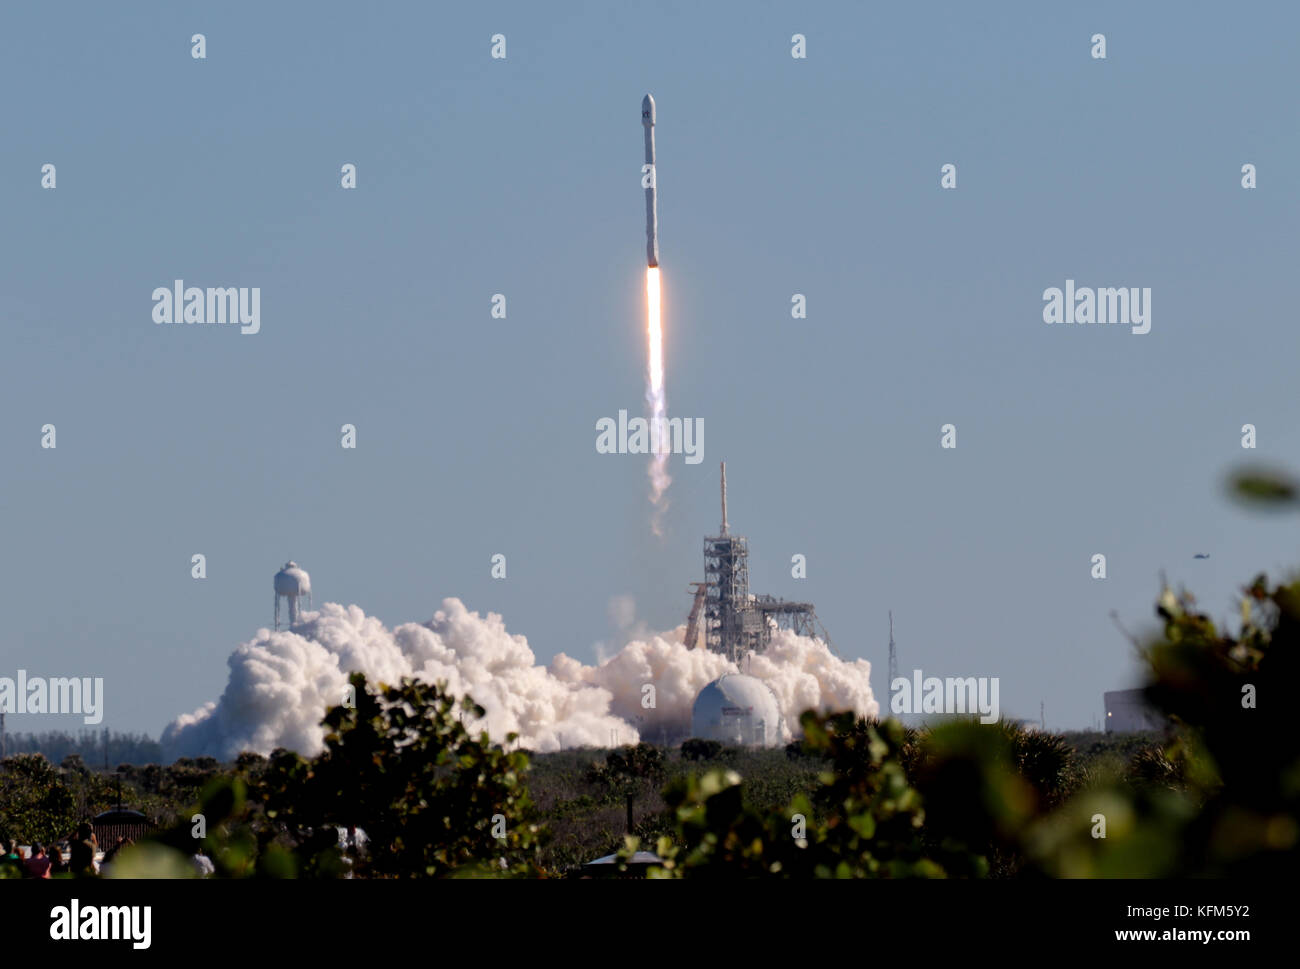 Rocket launch at NASA's Kennedy Space Center, Florida. On Monday, October 30th 2017 at 334 p.m., SpaceX successfully launched the Koreasat-5A satellite from Launch Complex 39A (LC-39A) at NASA's Kennedy Space Center, Florida Credit: Trevor Baker/Alamy Live News Stock Photo